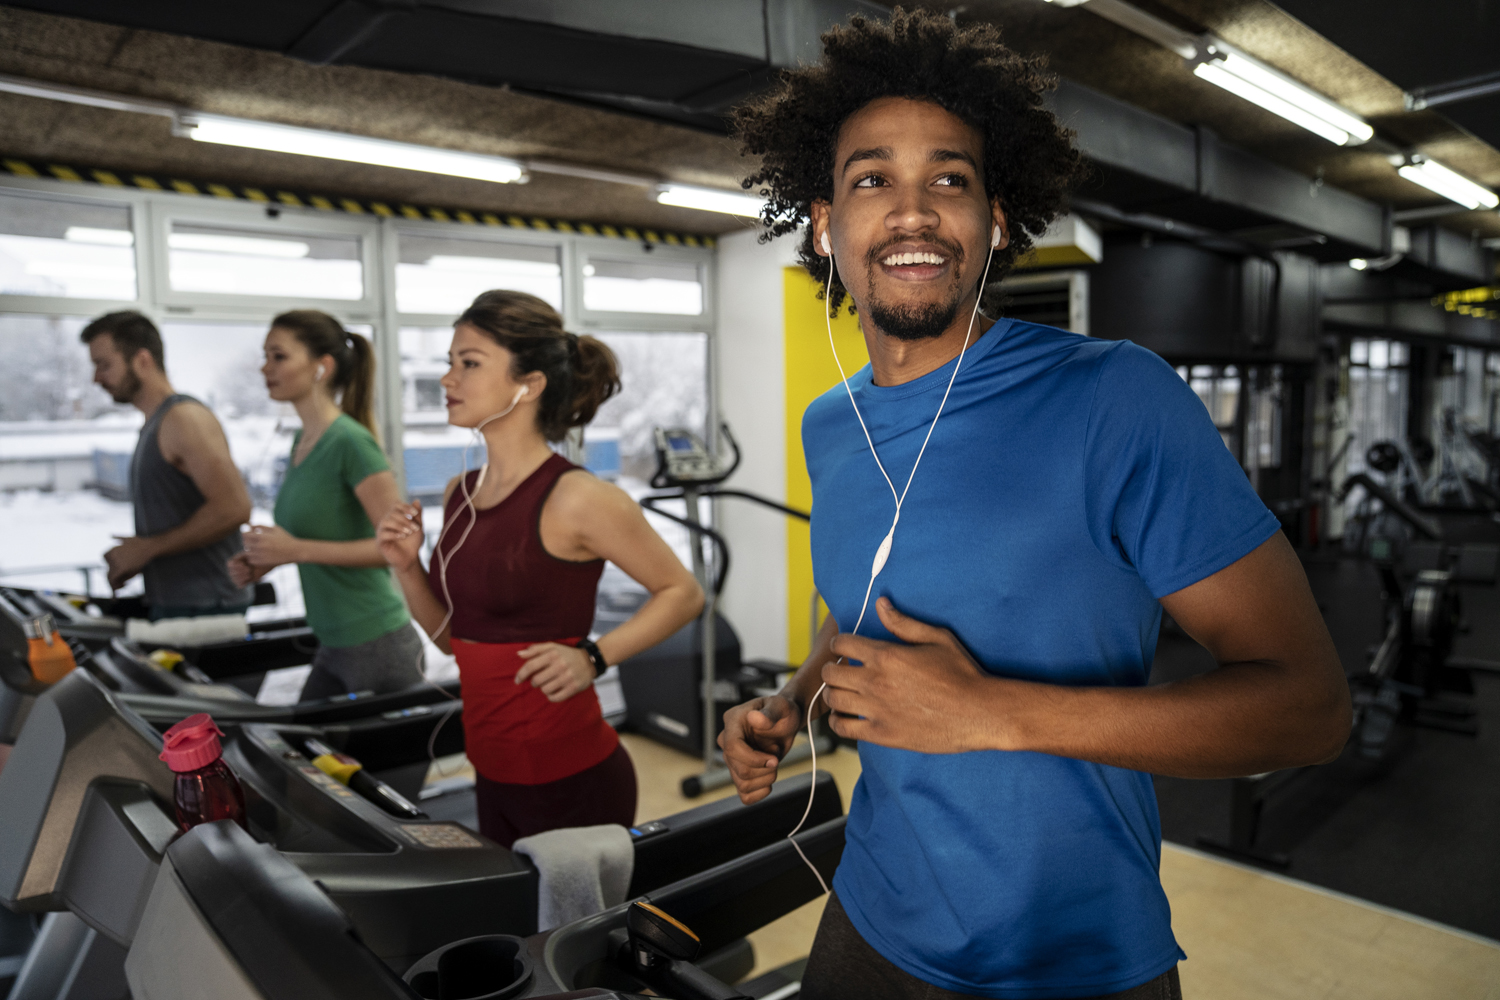 The 3 Best Treadmill Workout Tips, According to Fitness Experts - The Manual